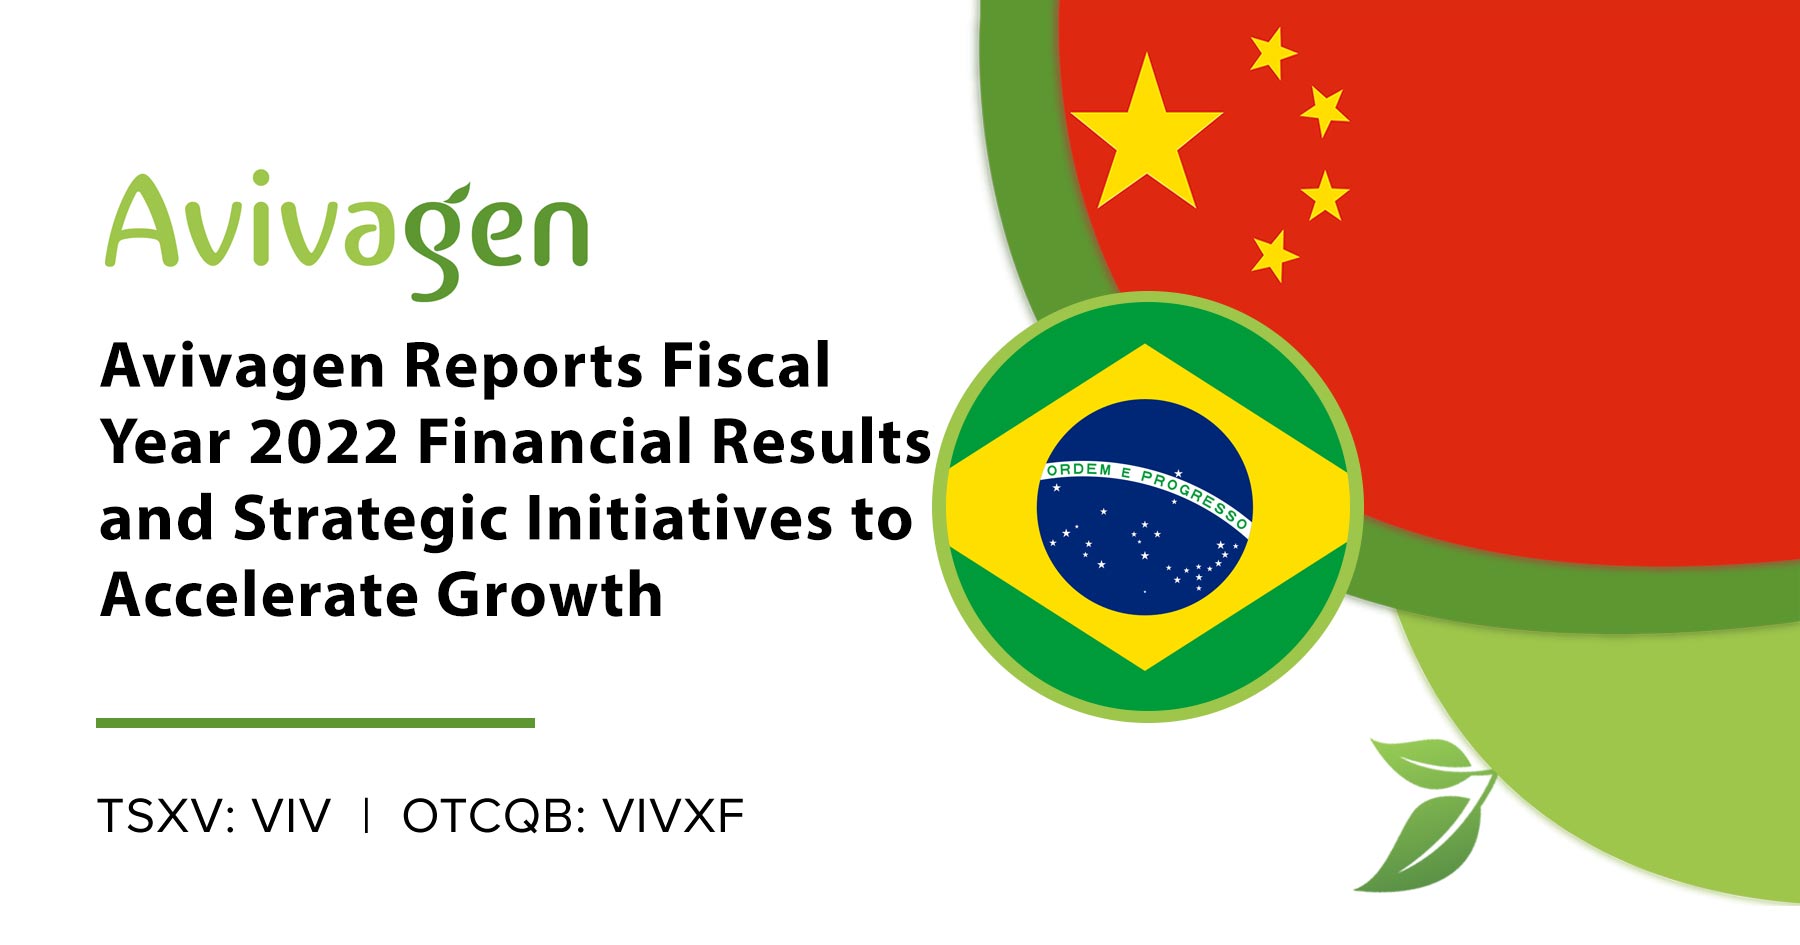 Avivagen Reports Fiscal Year 2022 Financial Results and Strategic Initiatives to Accelerate Growth